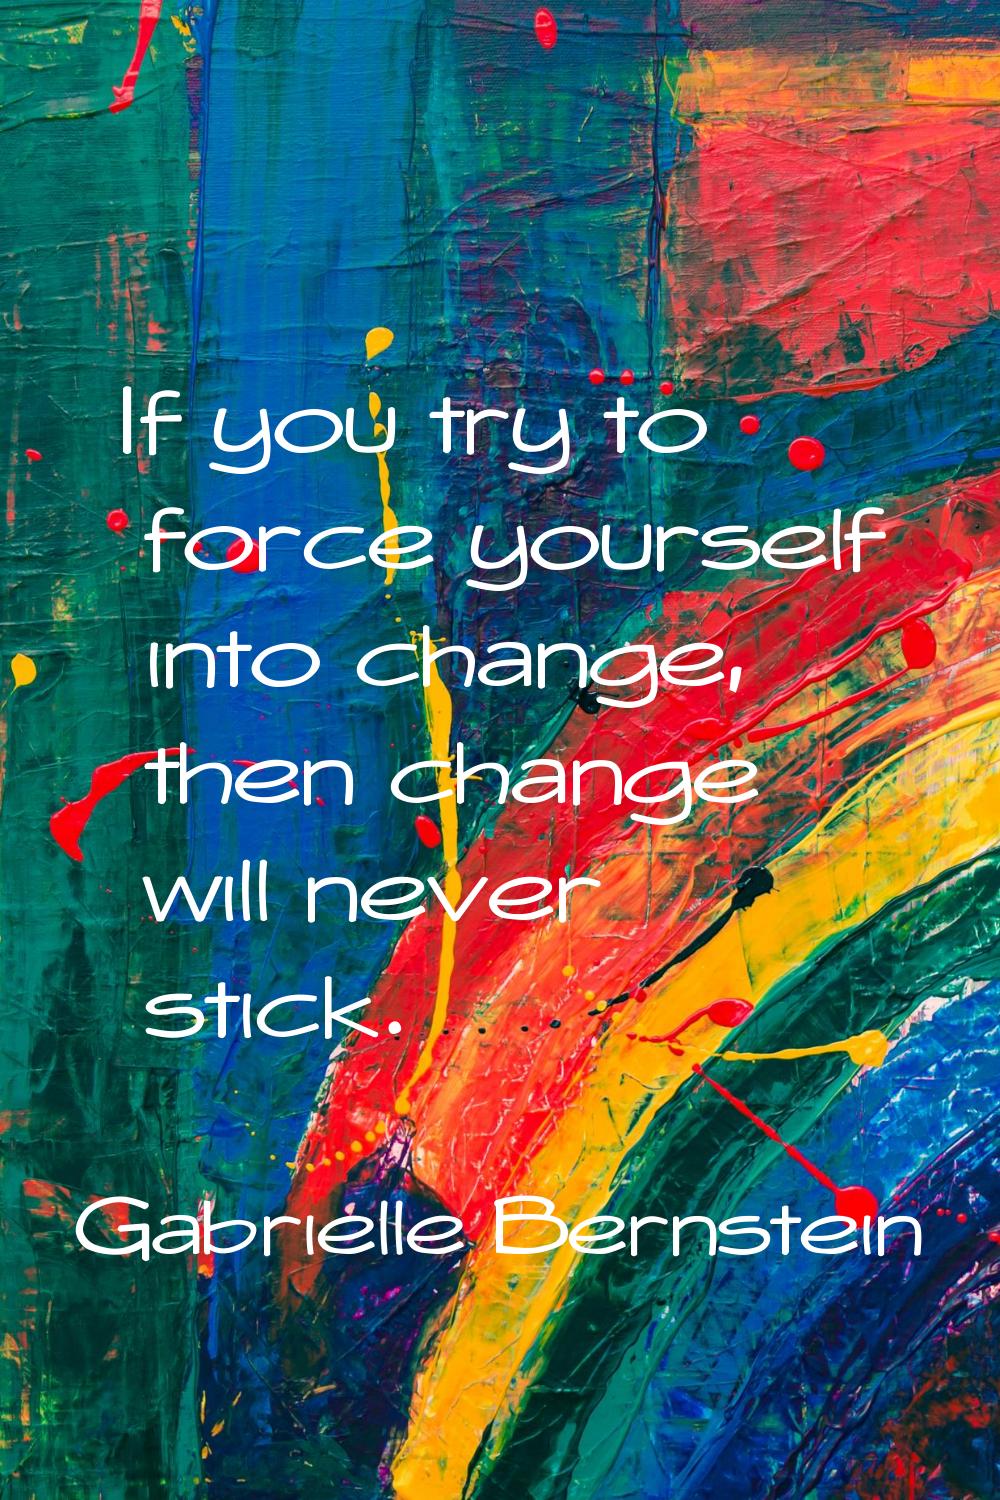 If you try to force yourself into change, then change will never stick.